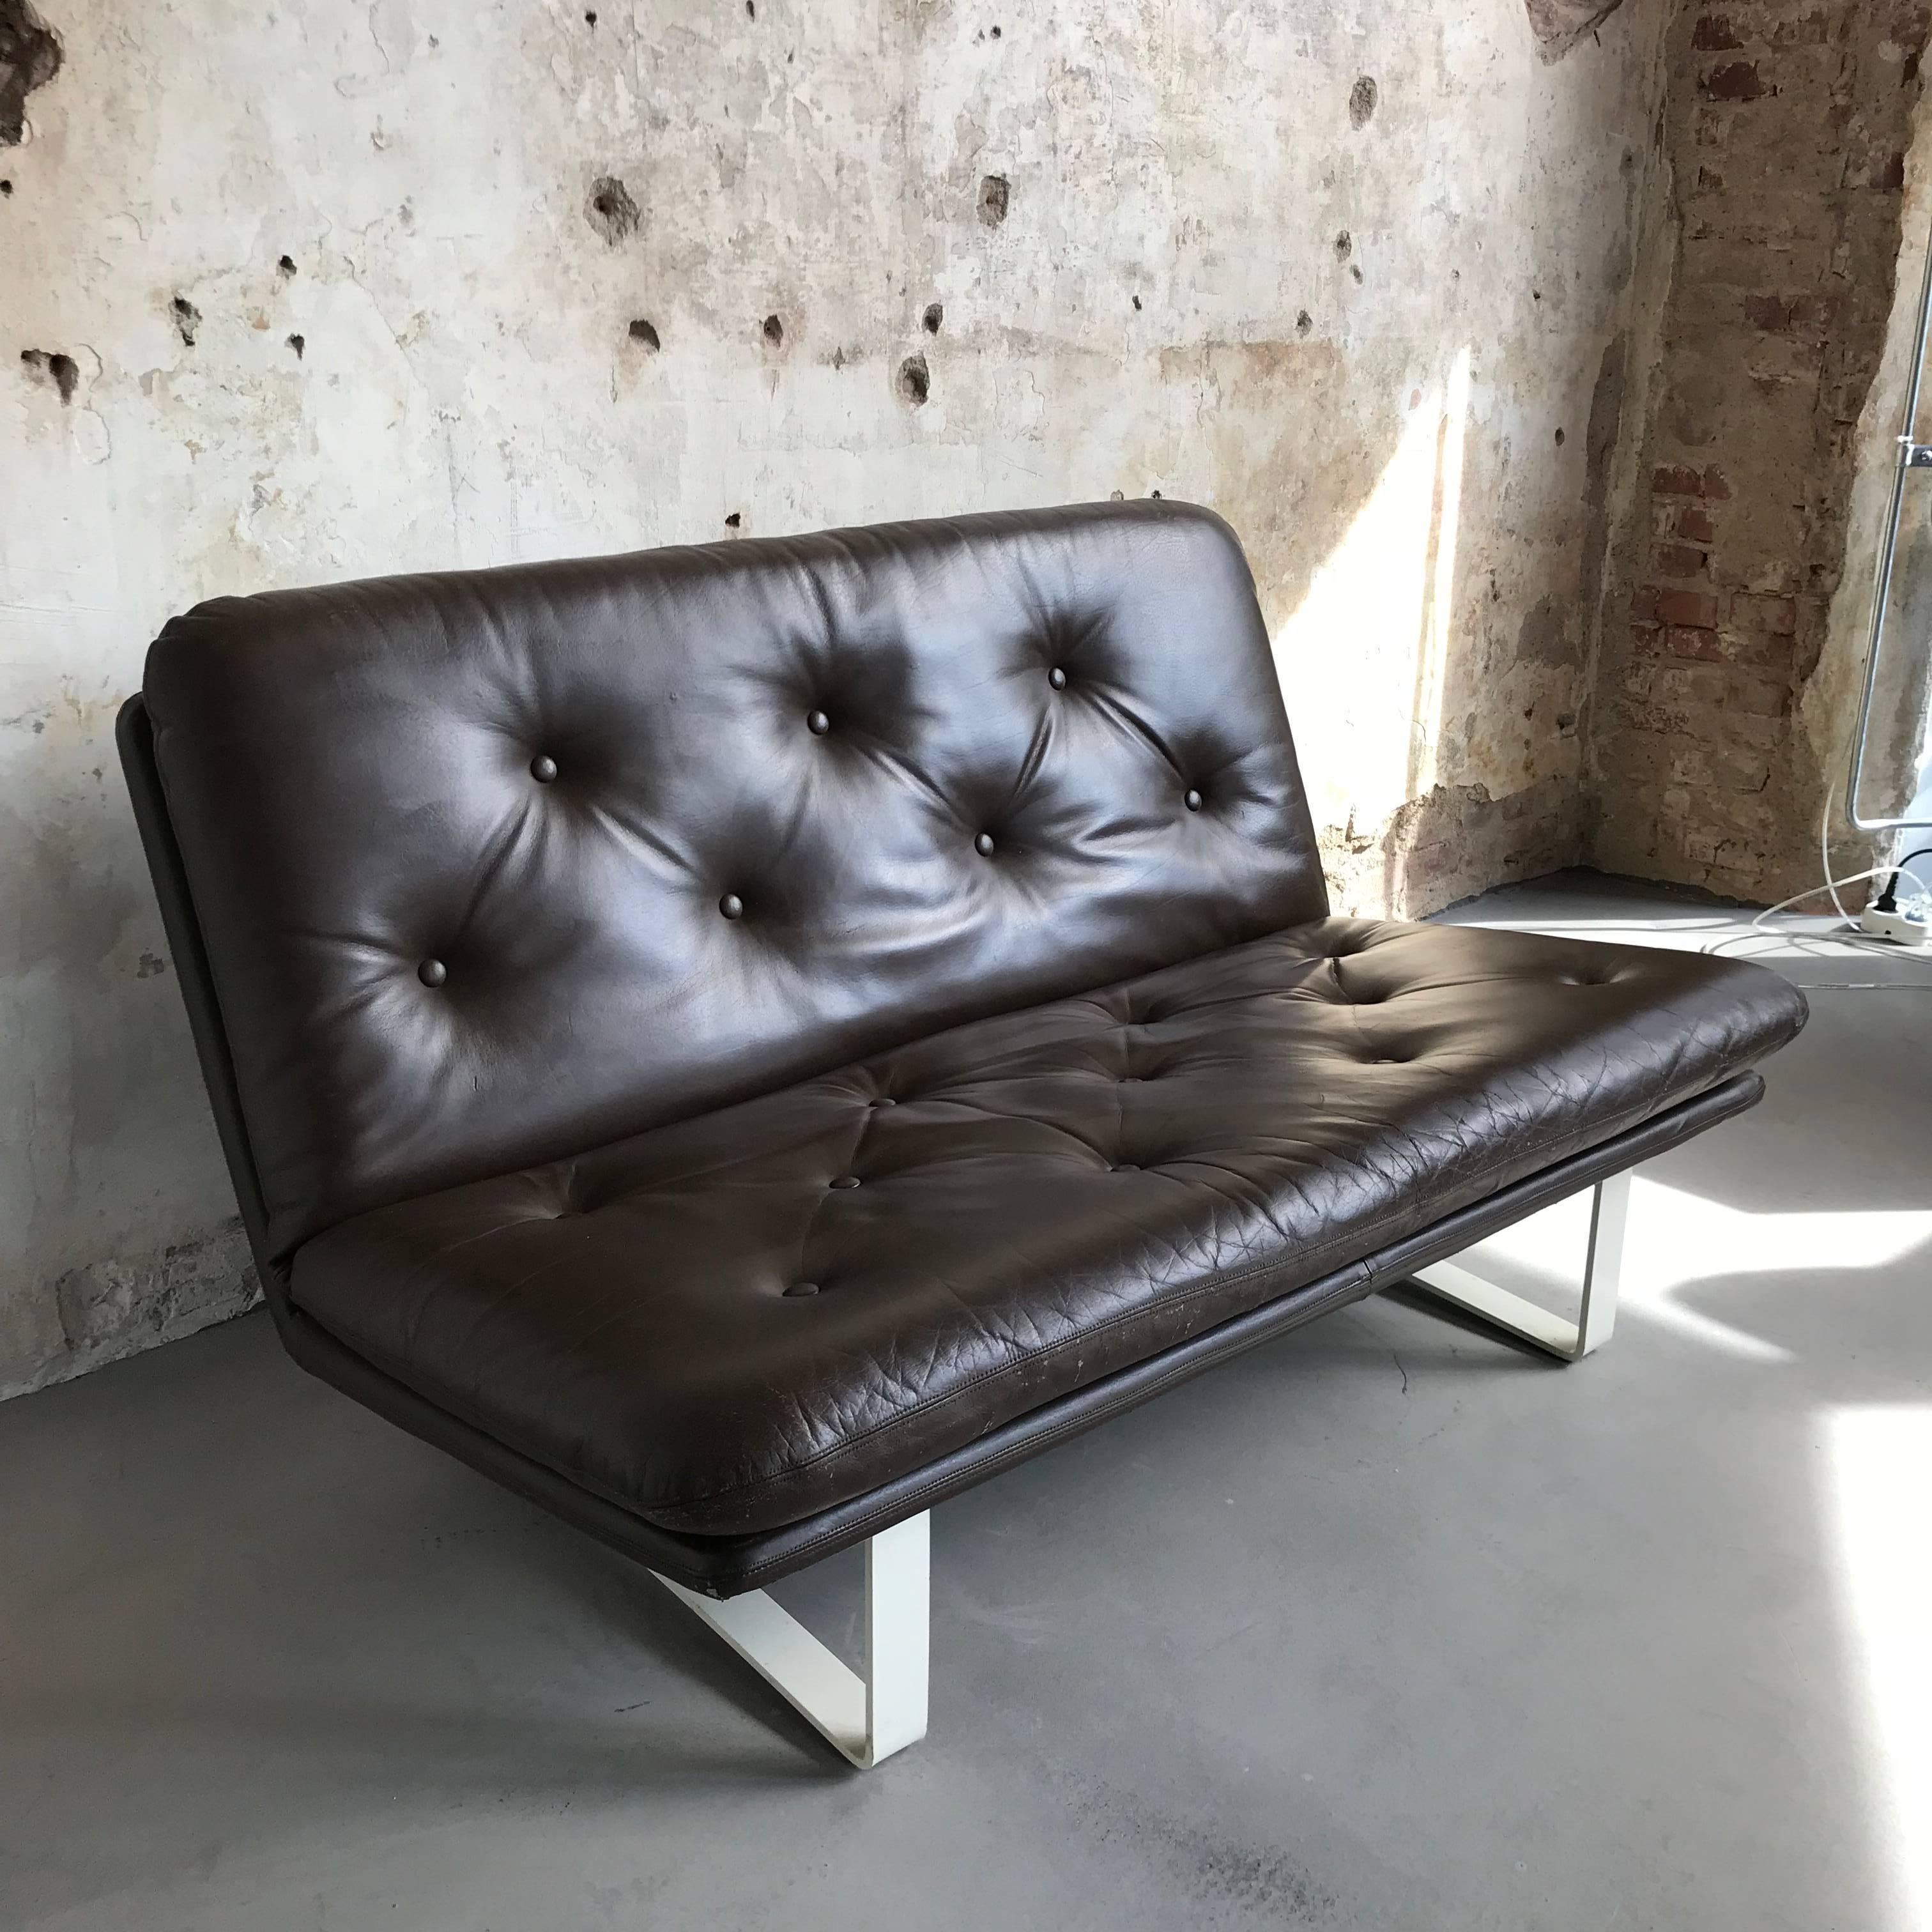 Beautiful, rare and original design sofa with a lot of character and (thankfully!) the original leather upholstery. This sofa comes directly from the 1st owner, bought in 1969 at the luxury department store Metz & Co. in Amsterdam. The leather is